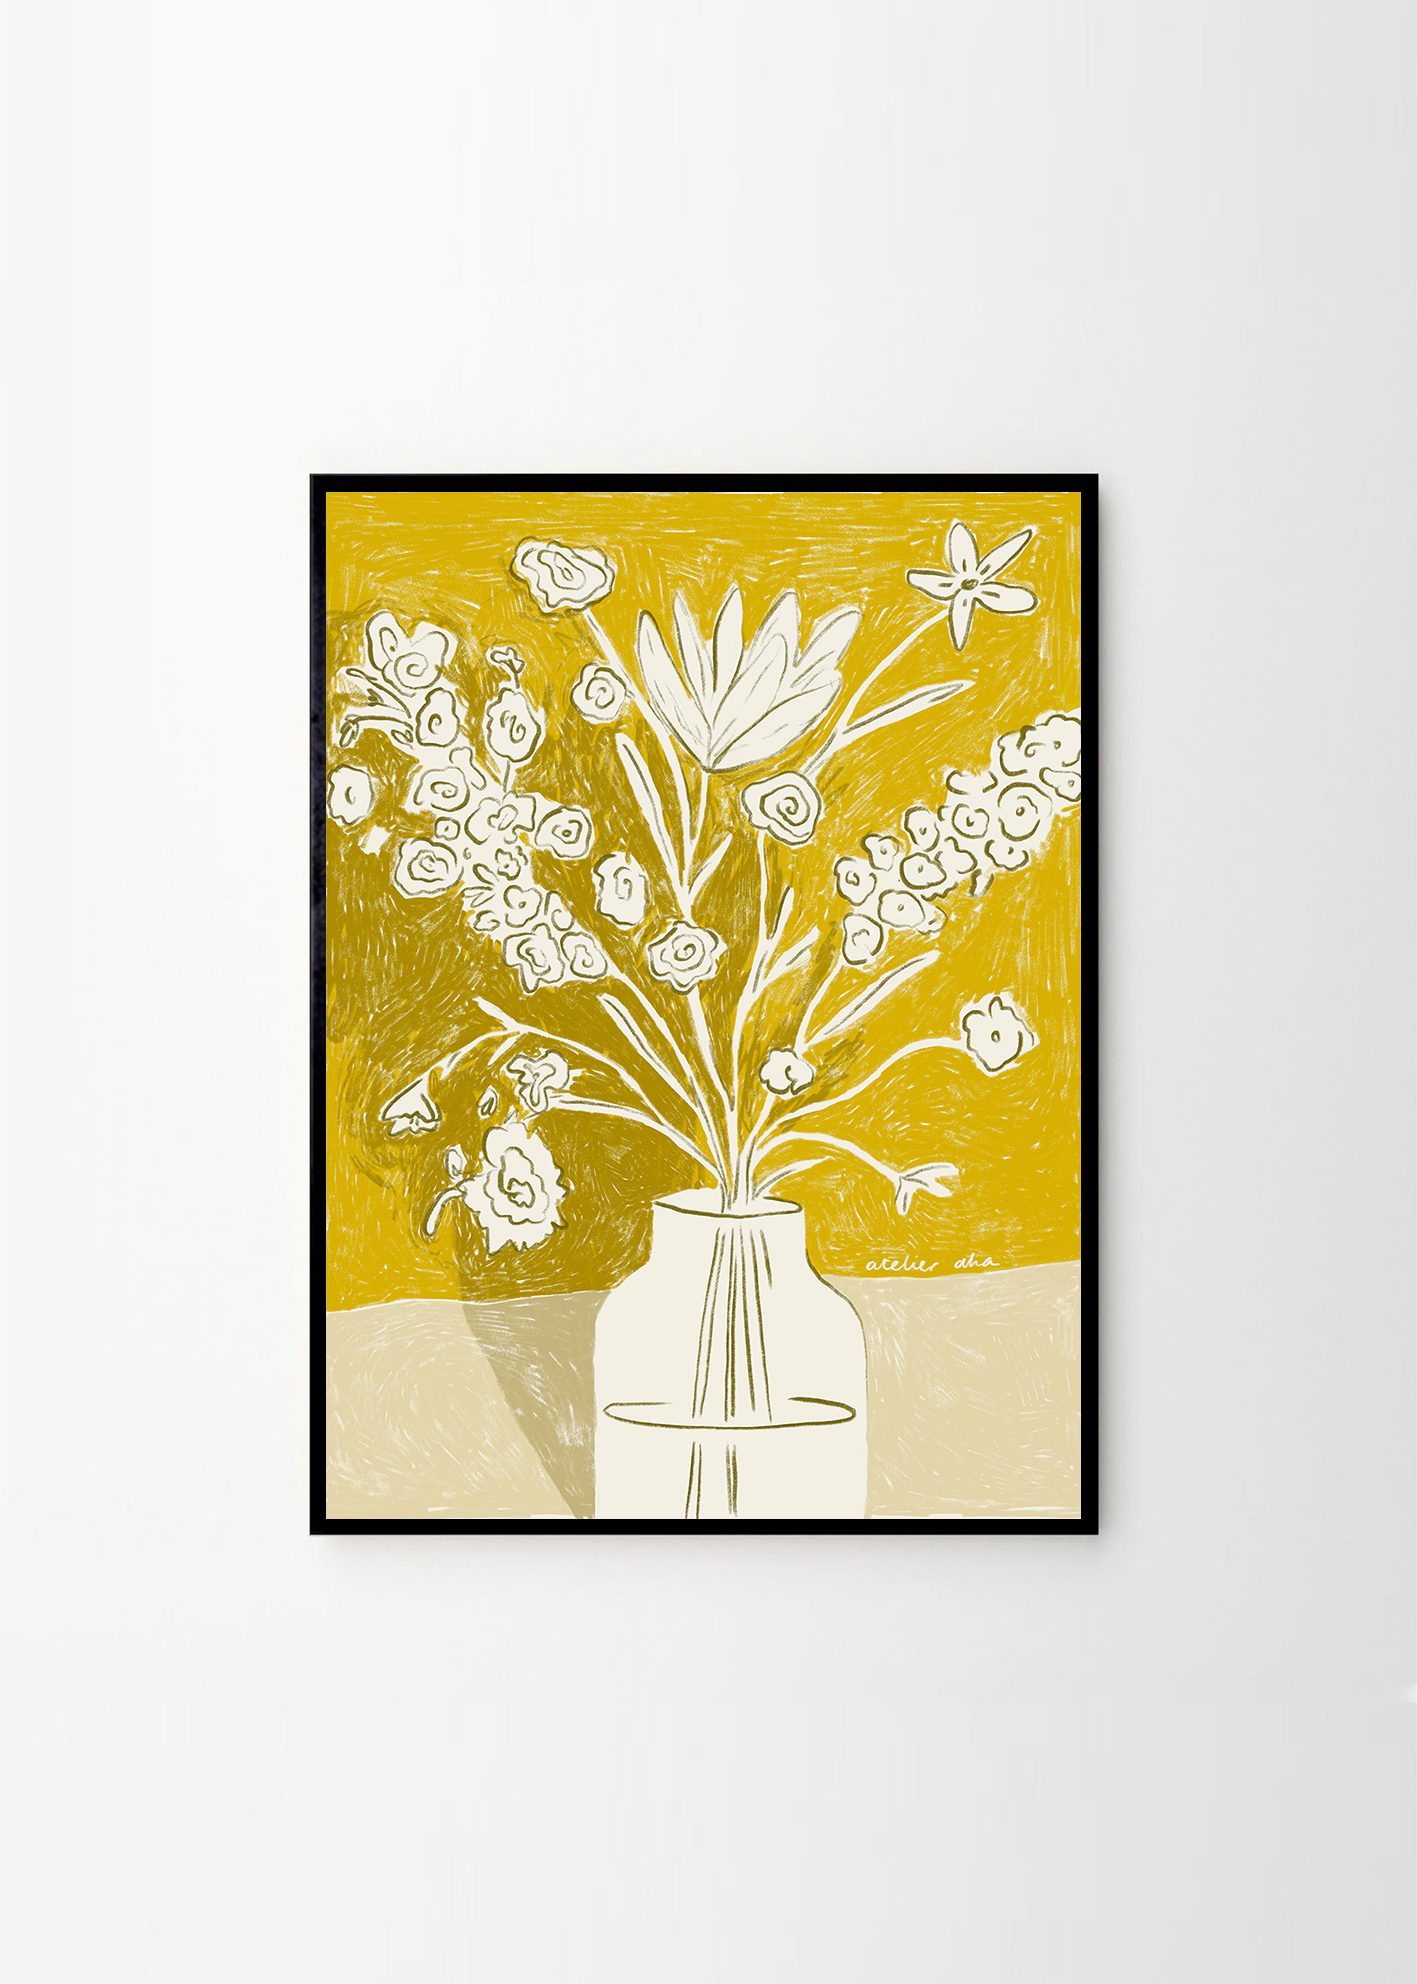 Anouk van Cleef, A Yellow Bouquet, exclusively for THE POSTER CLUB